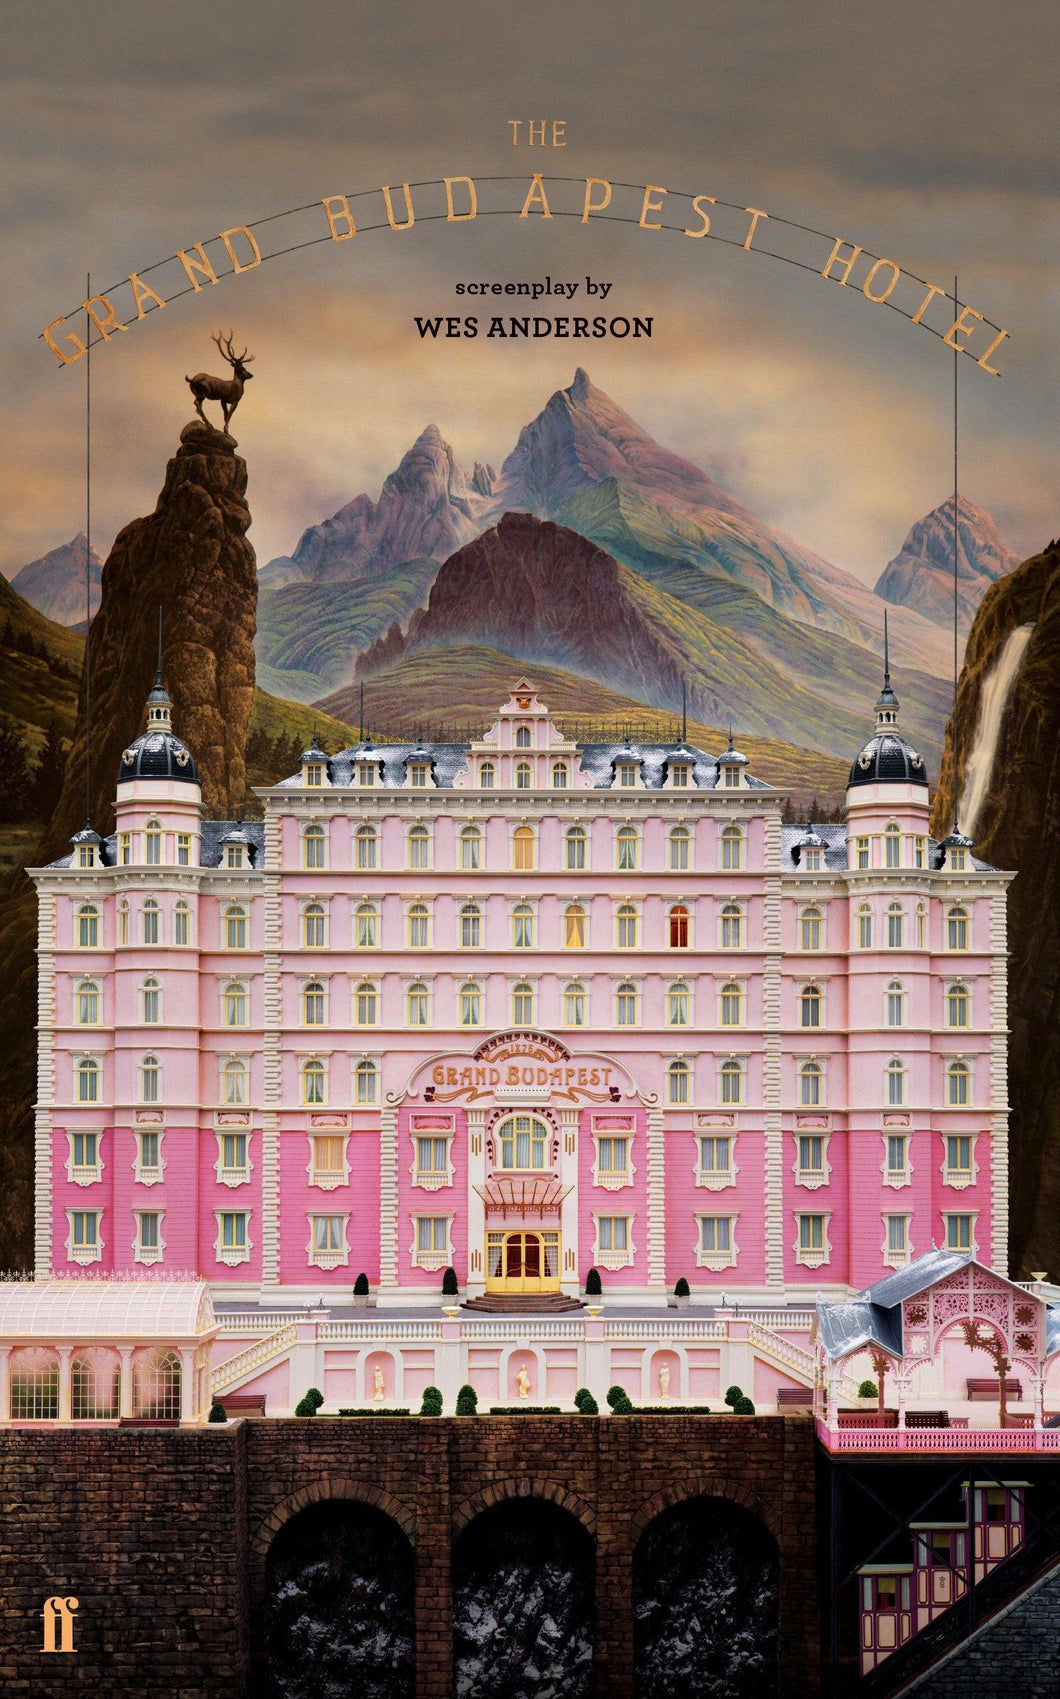 The Grand Budapest Hotel - Wes Anderson Screenplay